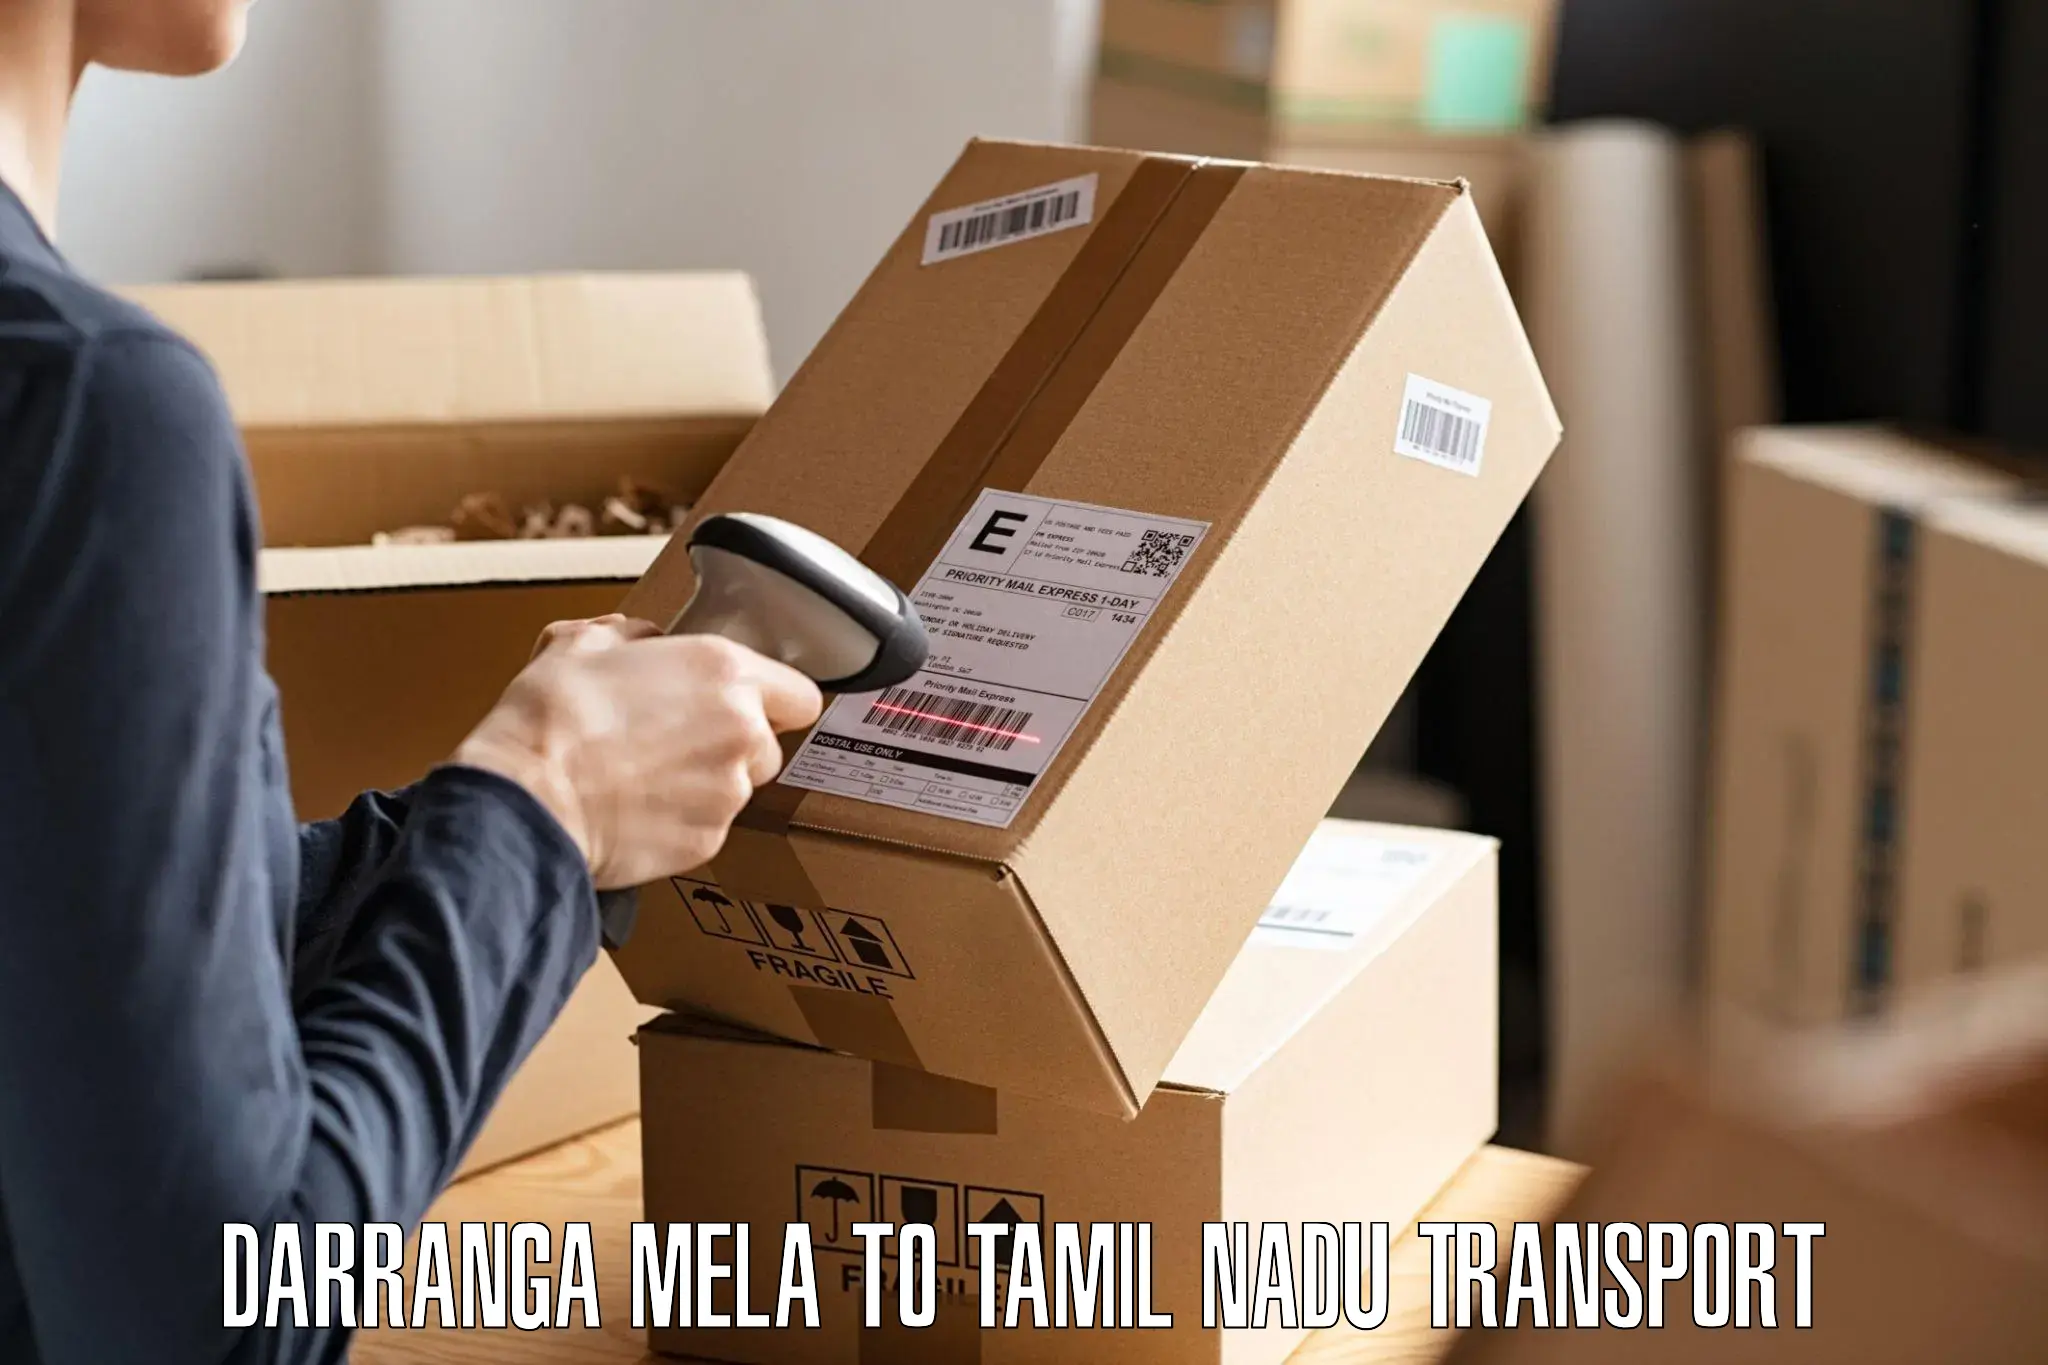 Express transport services Darranga Mela to SRM Institute of Science and Technology Chennai